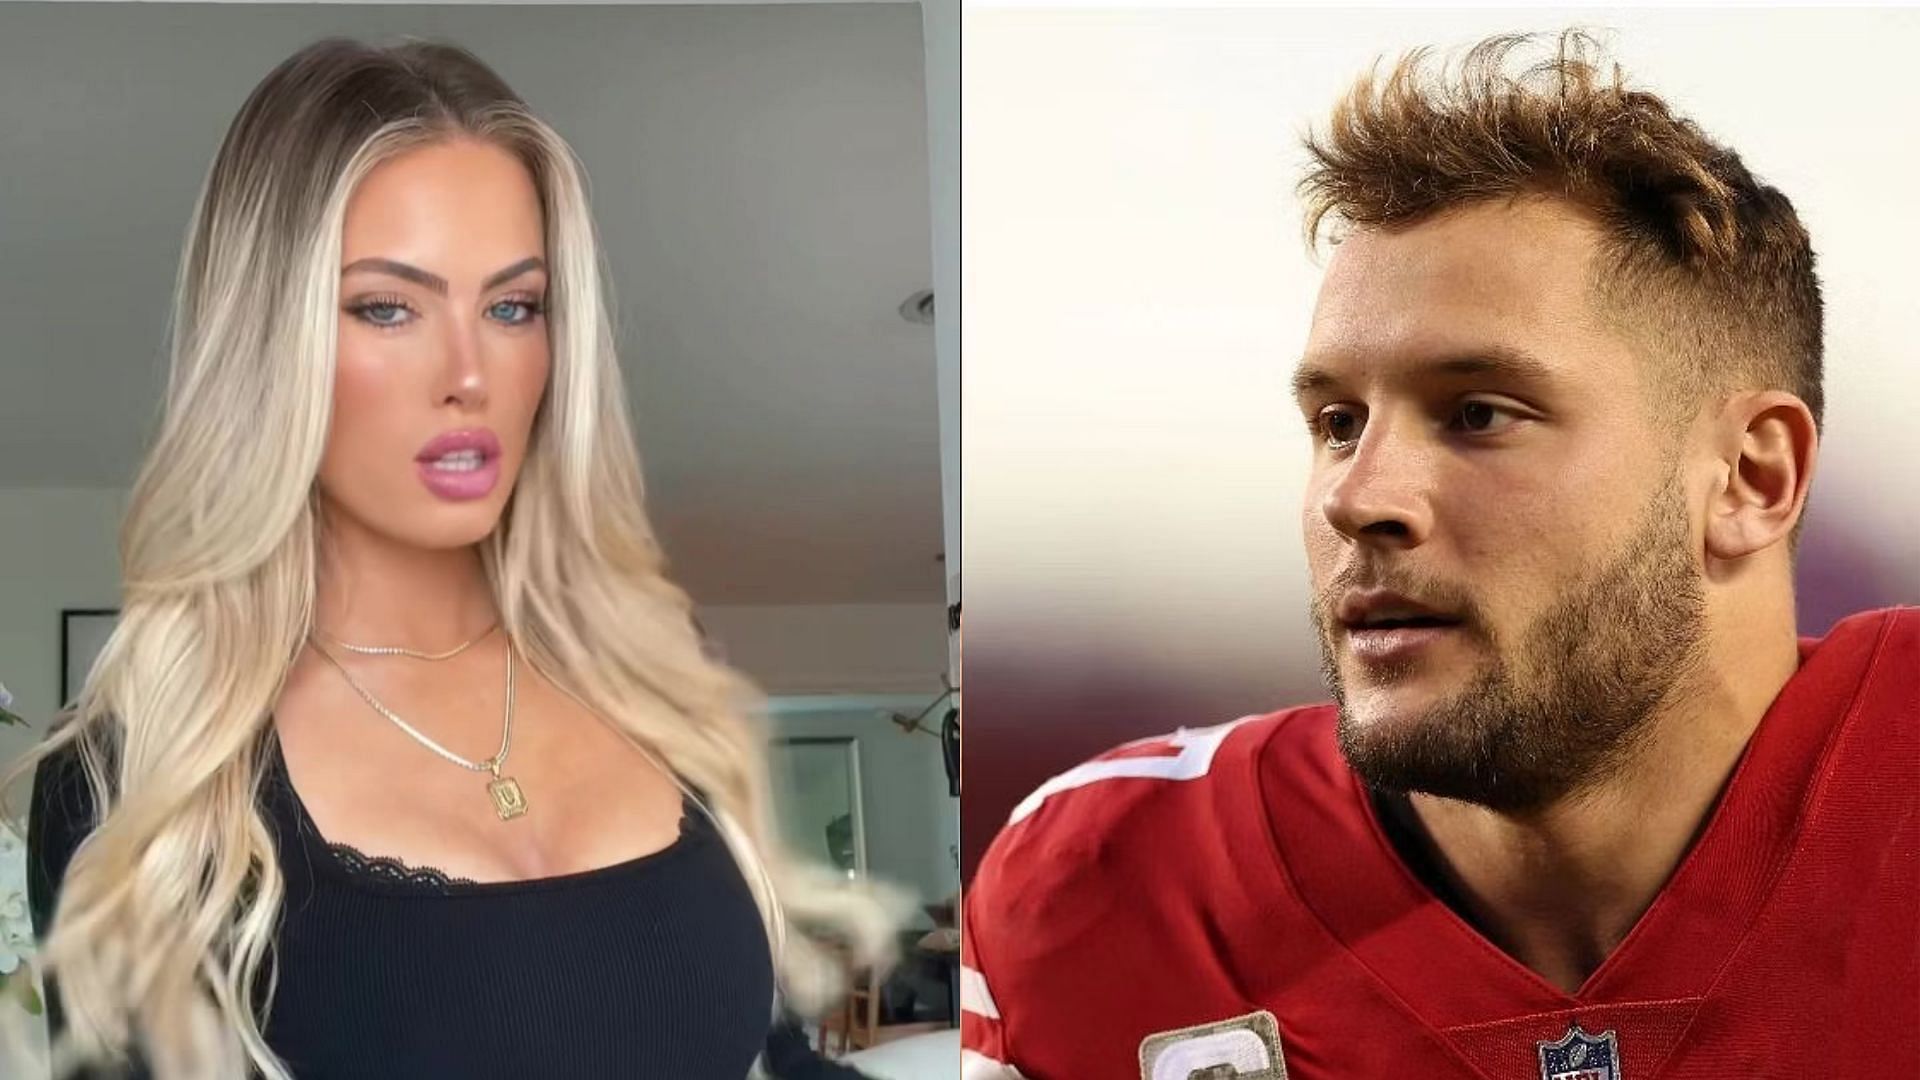 Jenna Berman and Nick Bosa have reportedly now gone their separate ways.